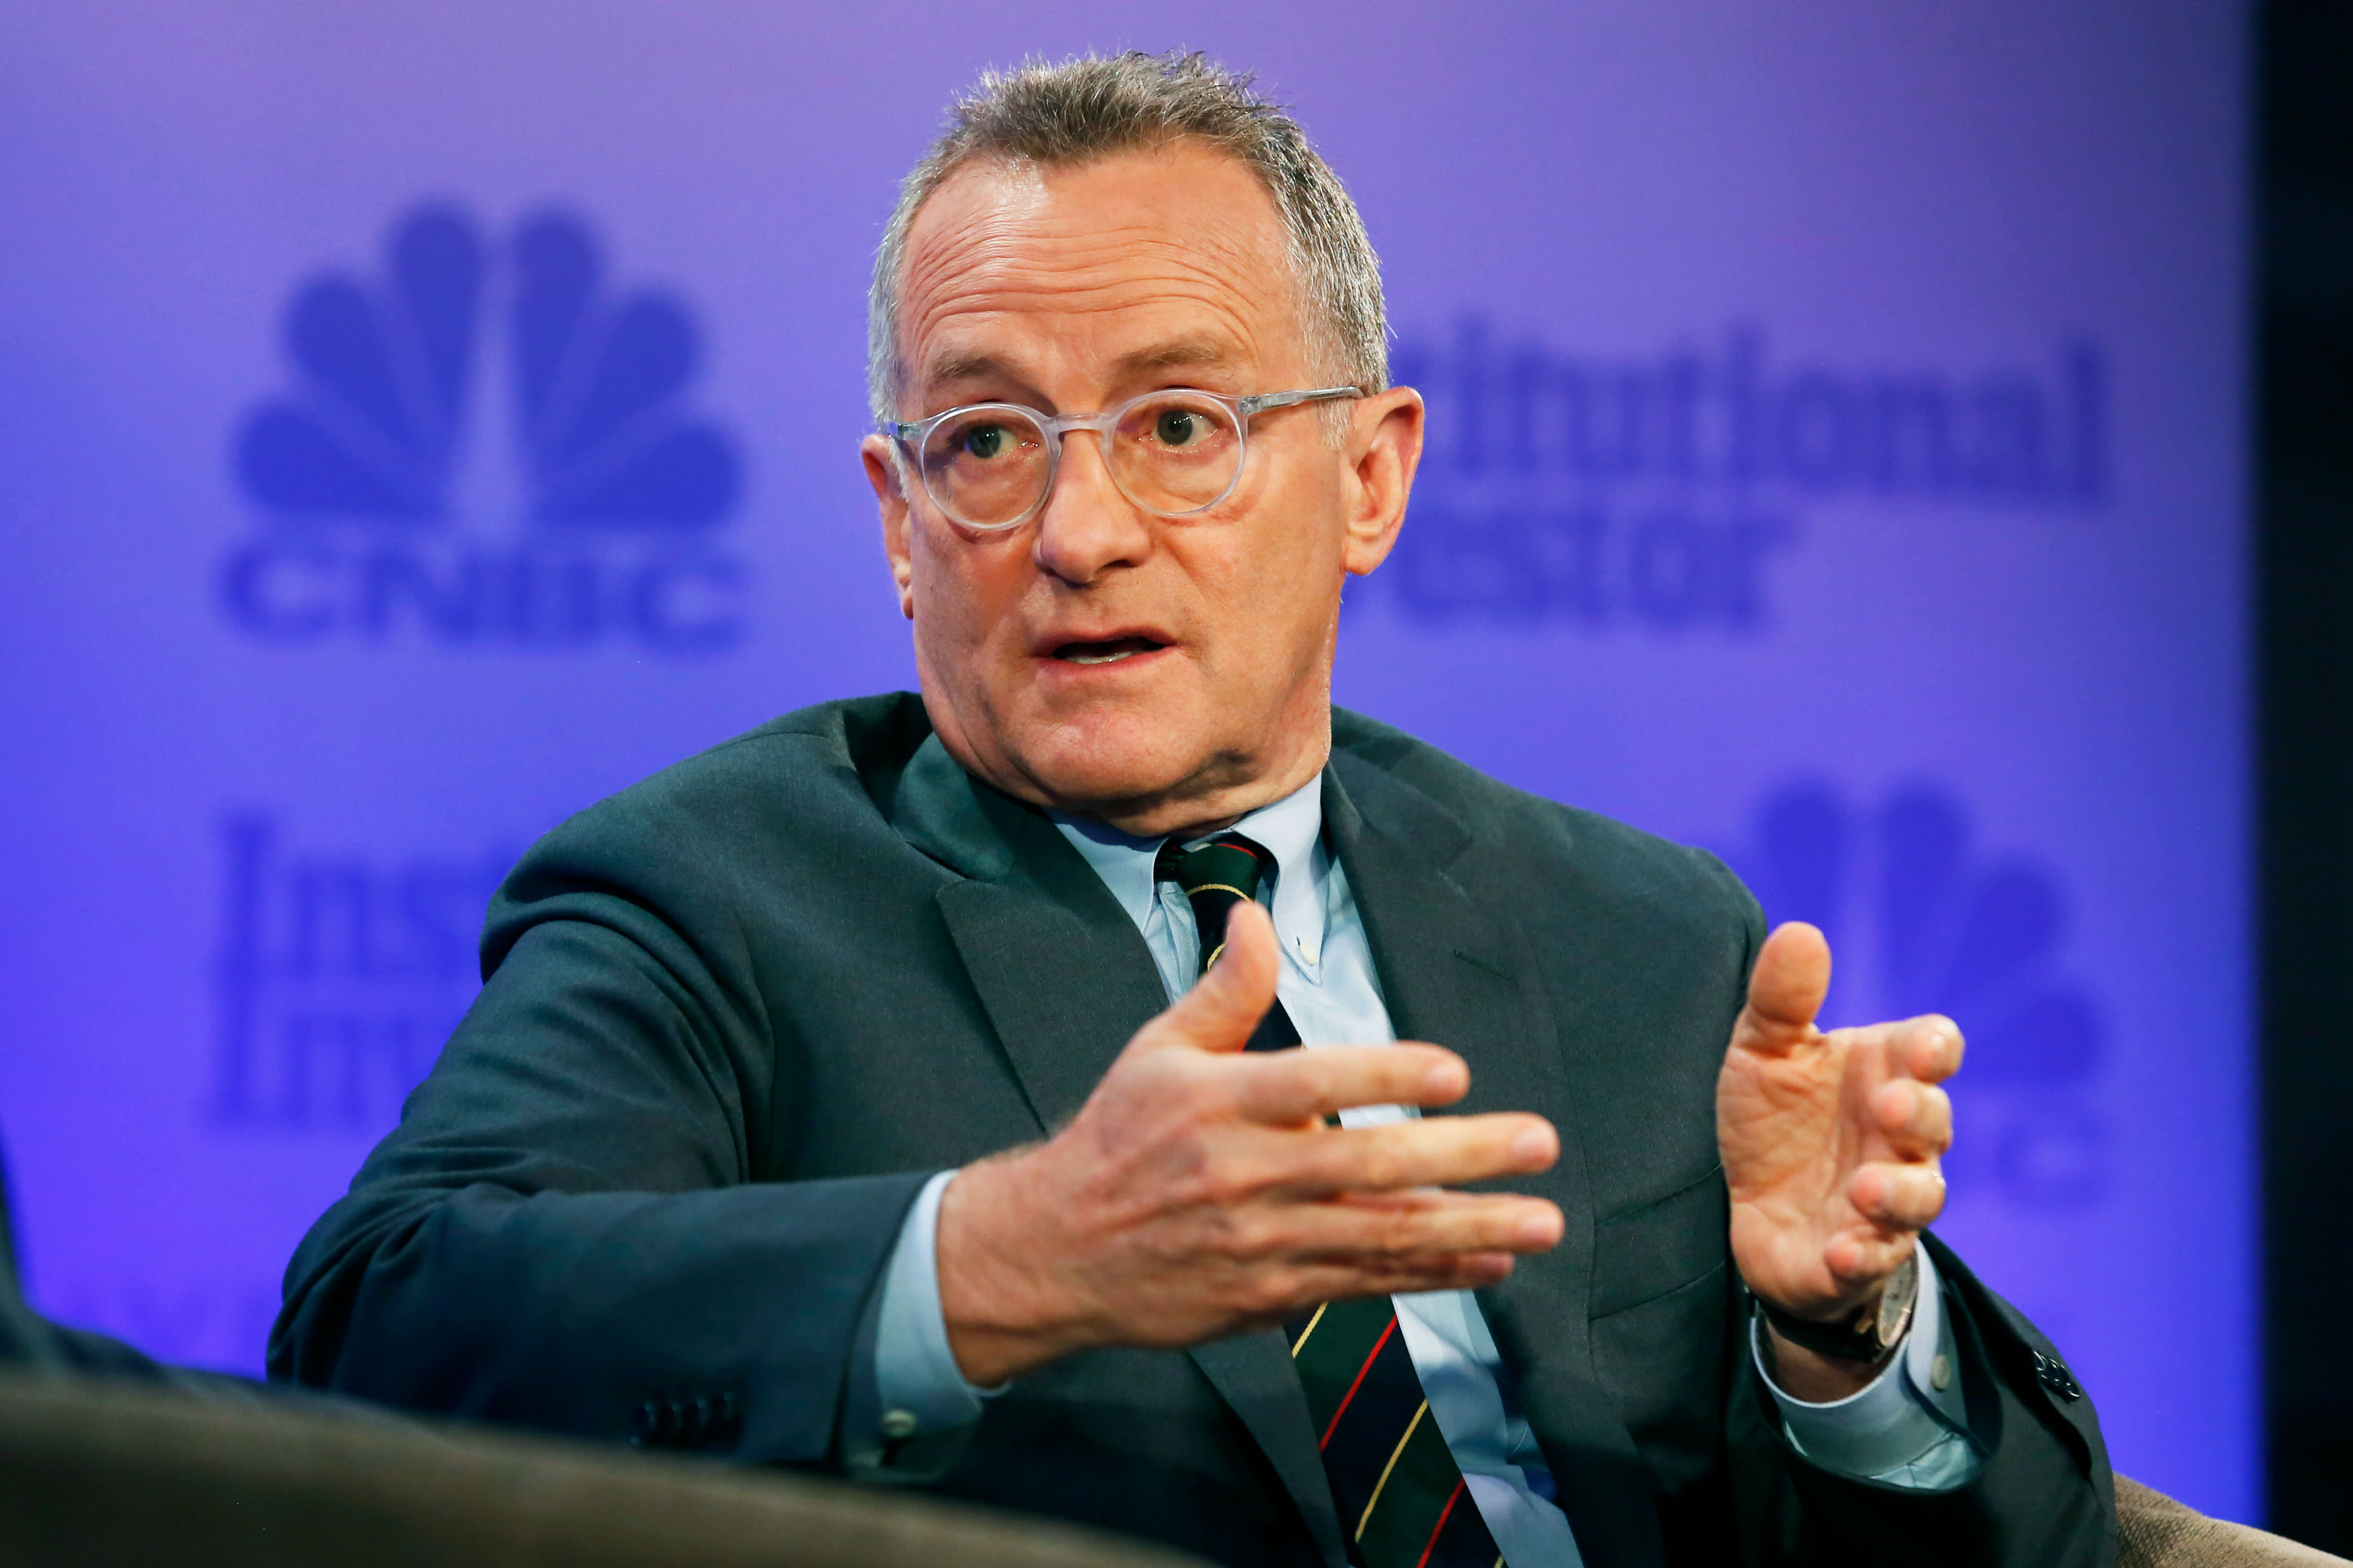 Returns will be harder to come by moving forward, investor Howard Marks says